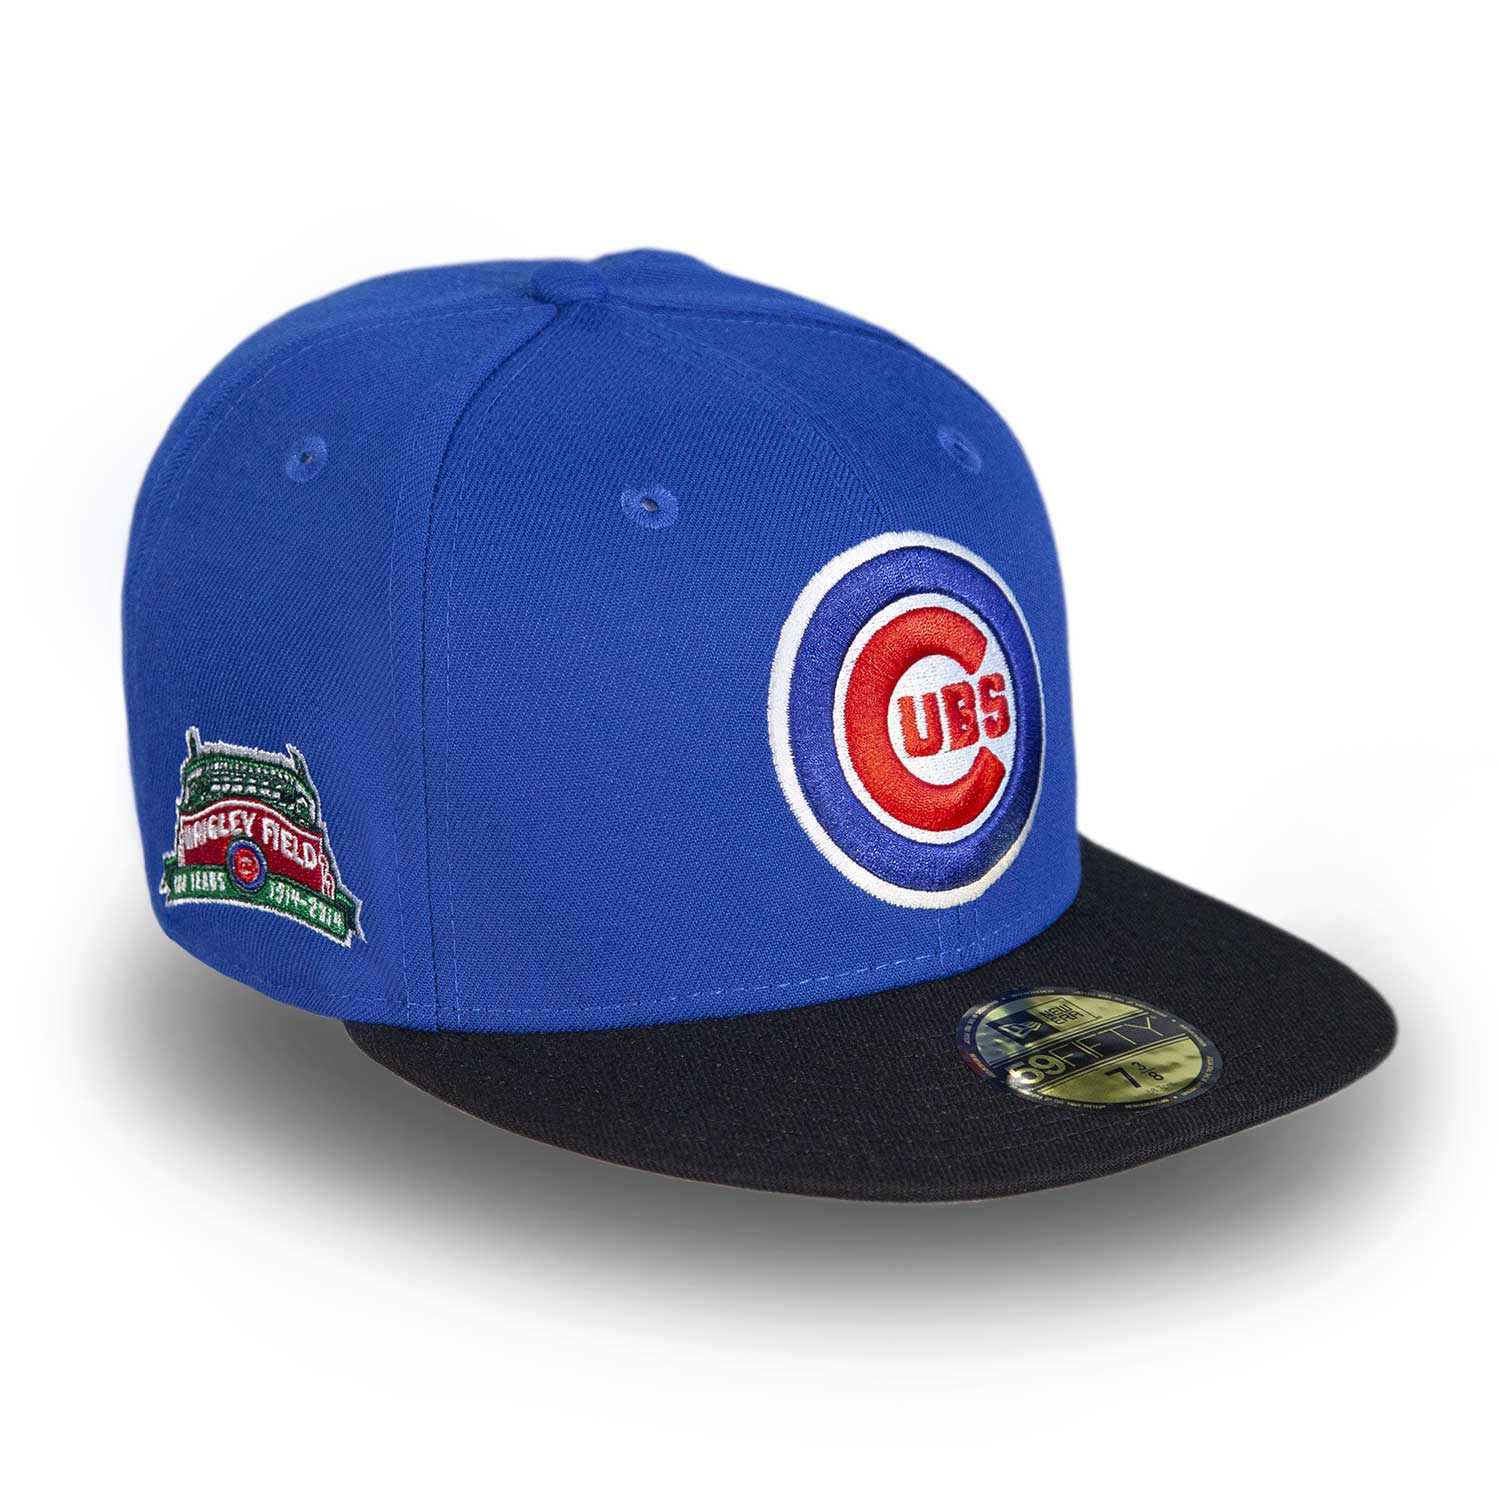 Official Baby Chicago Cubs Hats, Cubs Cap, Cubs Hats, Beanies